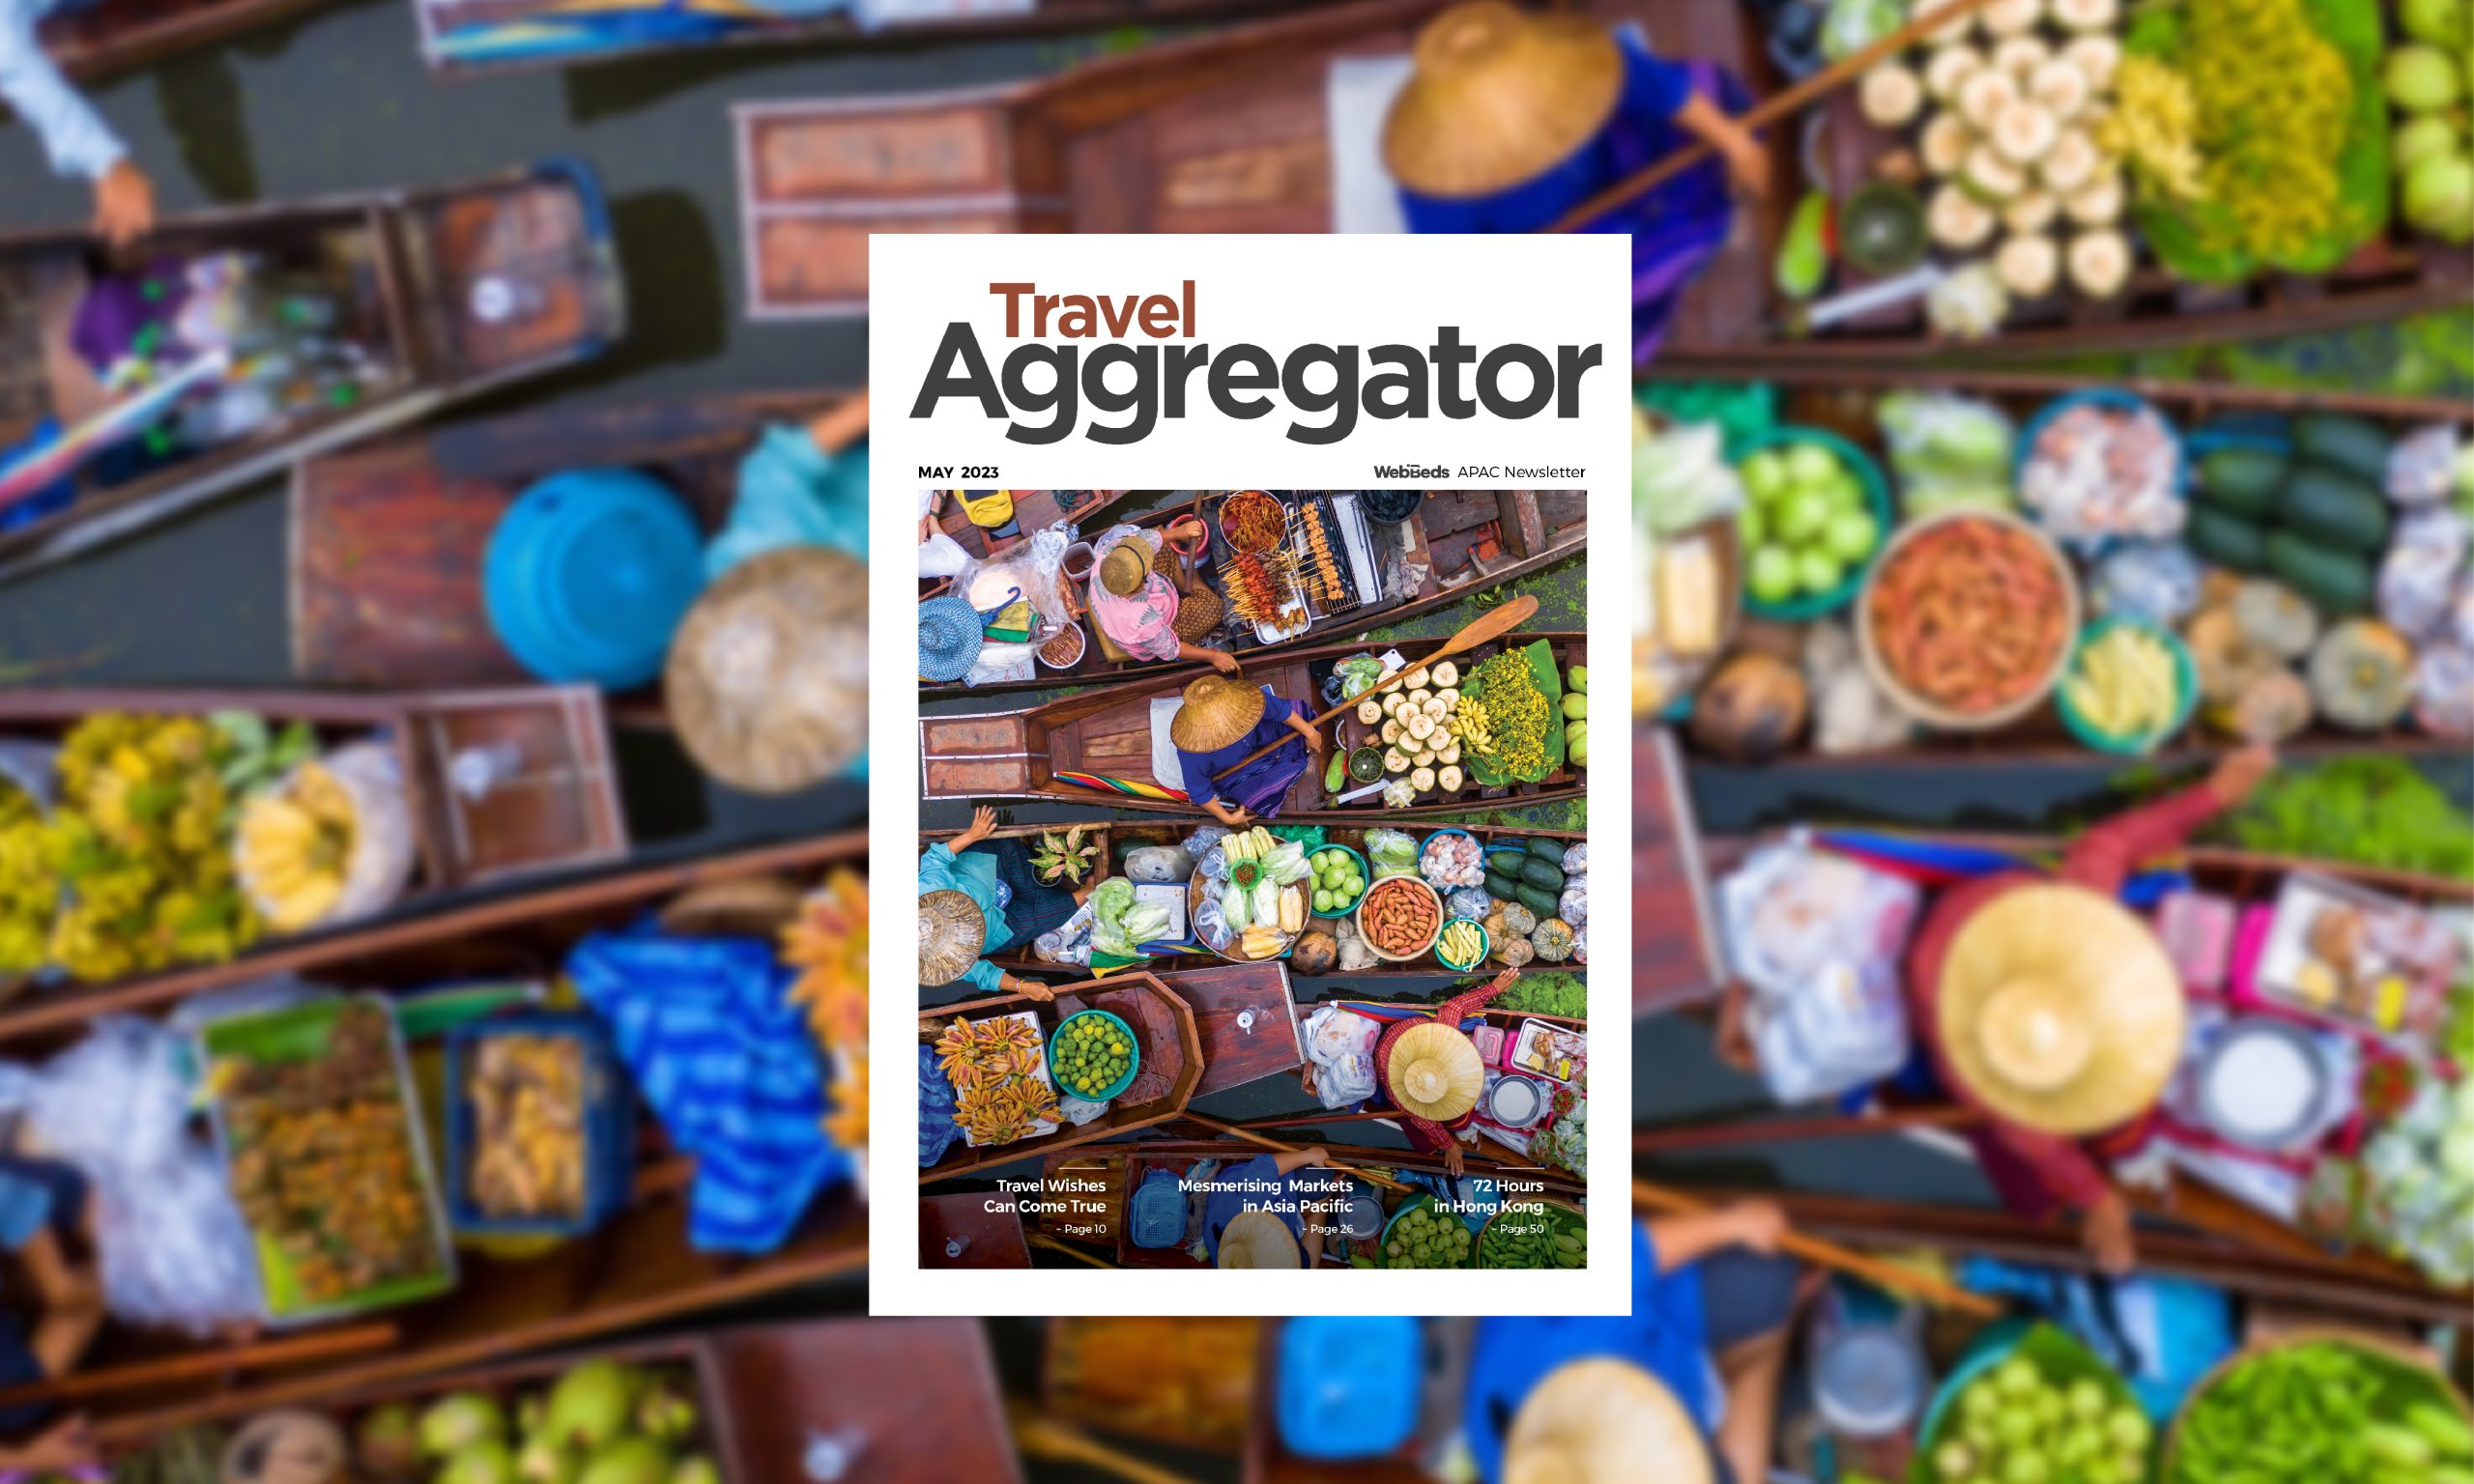 Travel Aggregator Magazine – May 2023 Edition Out Now